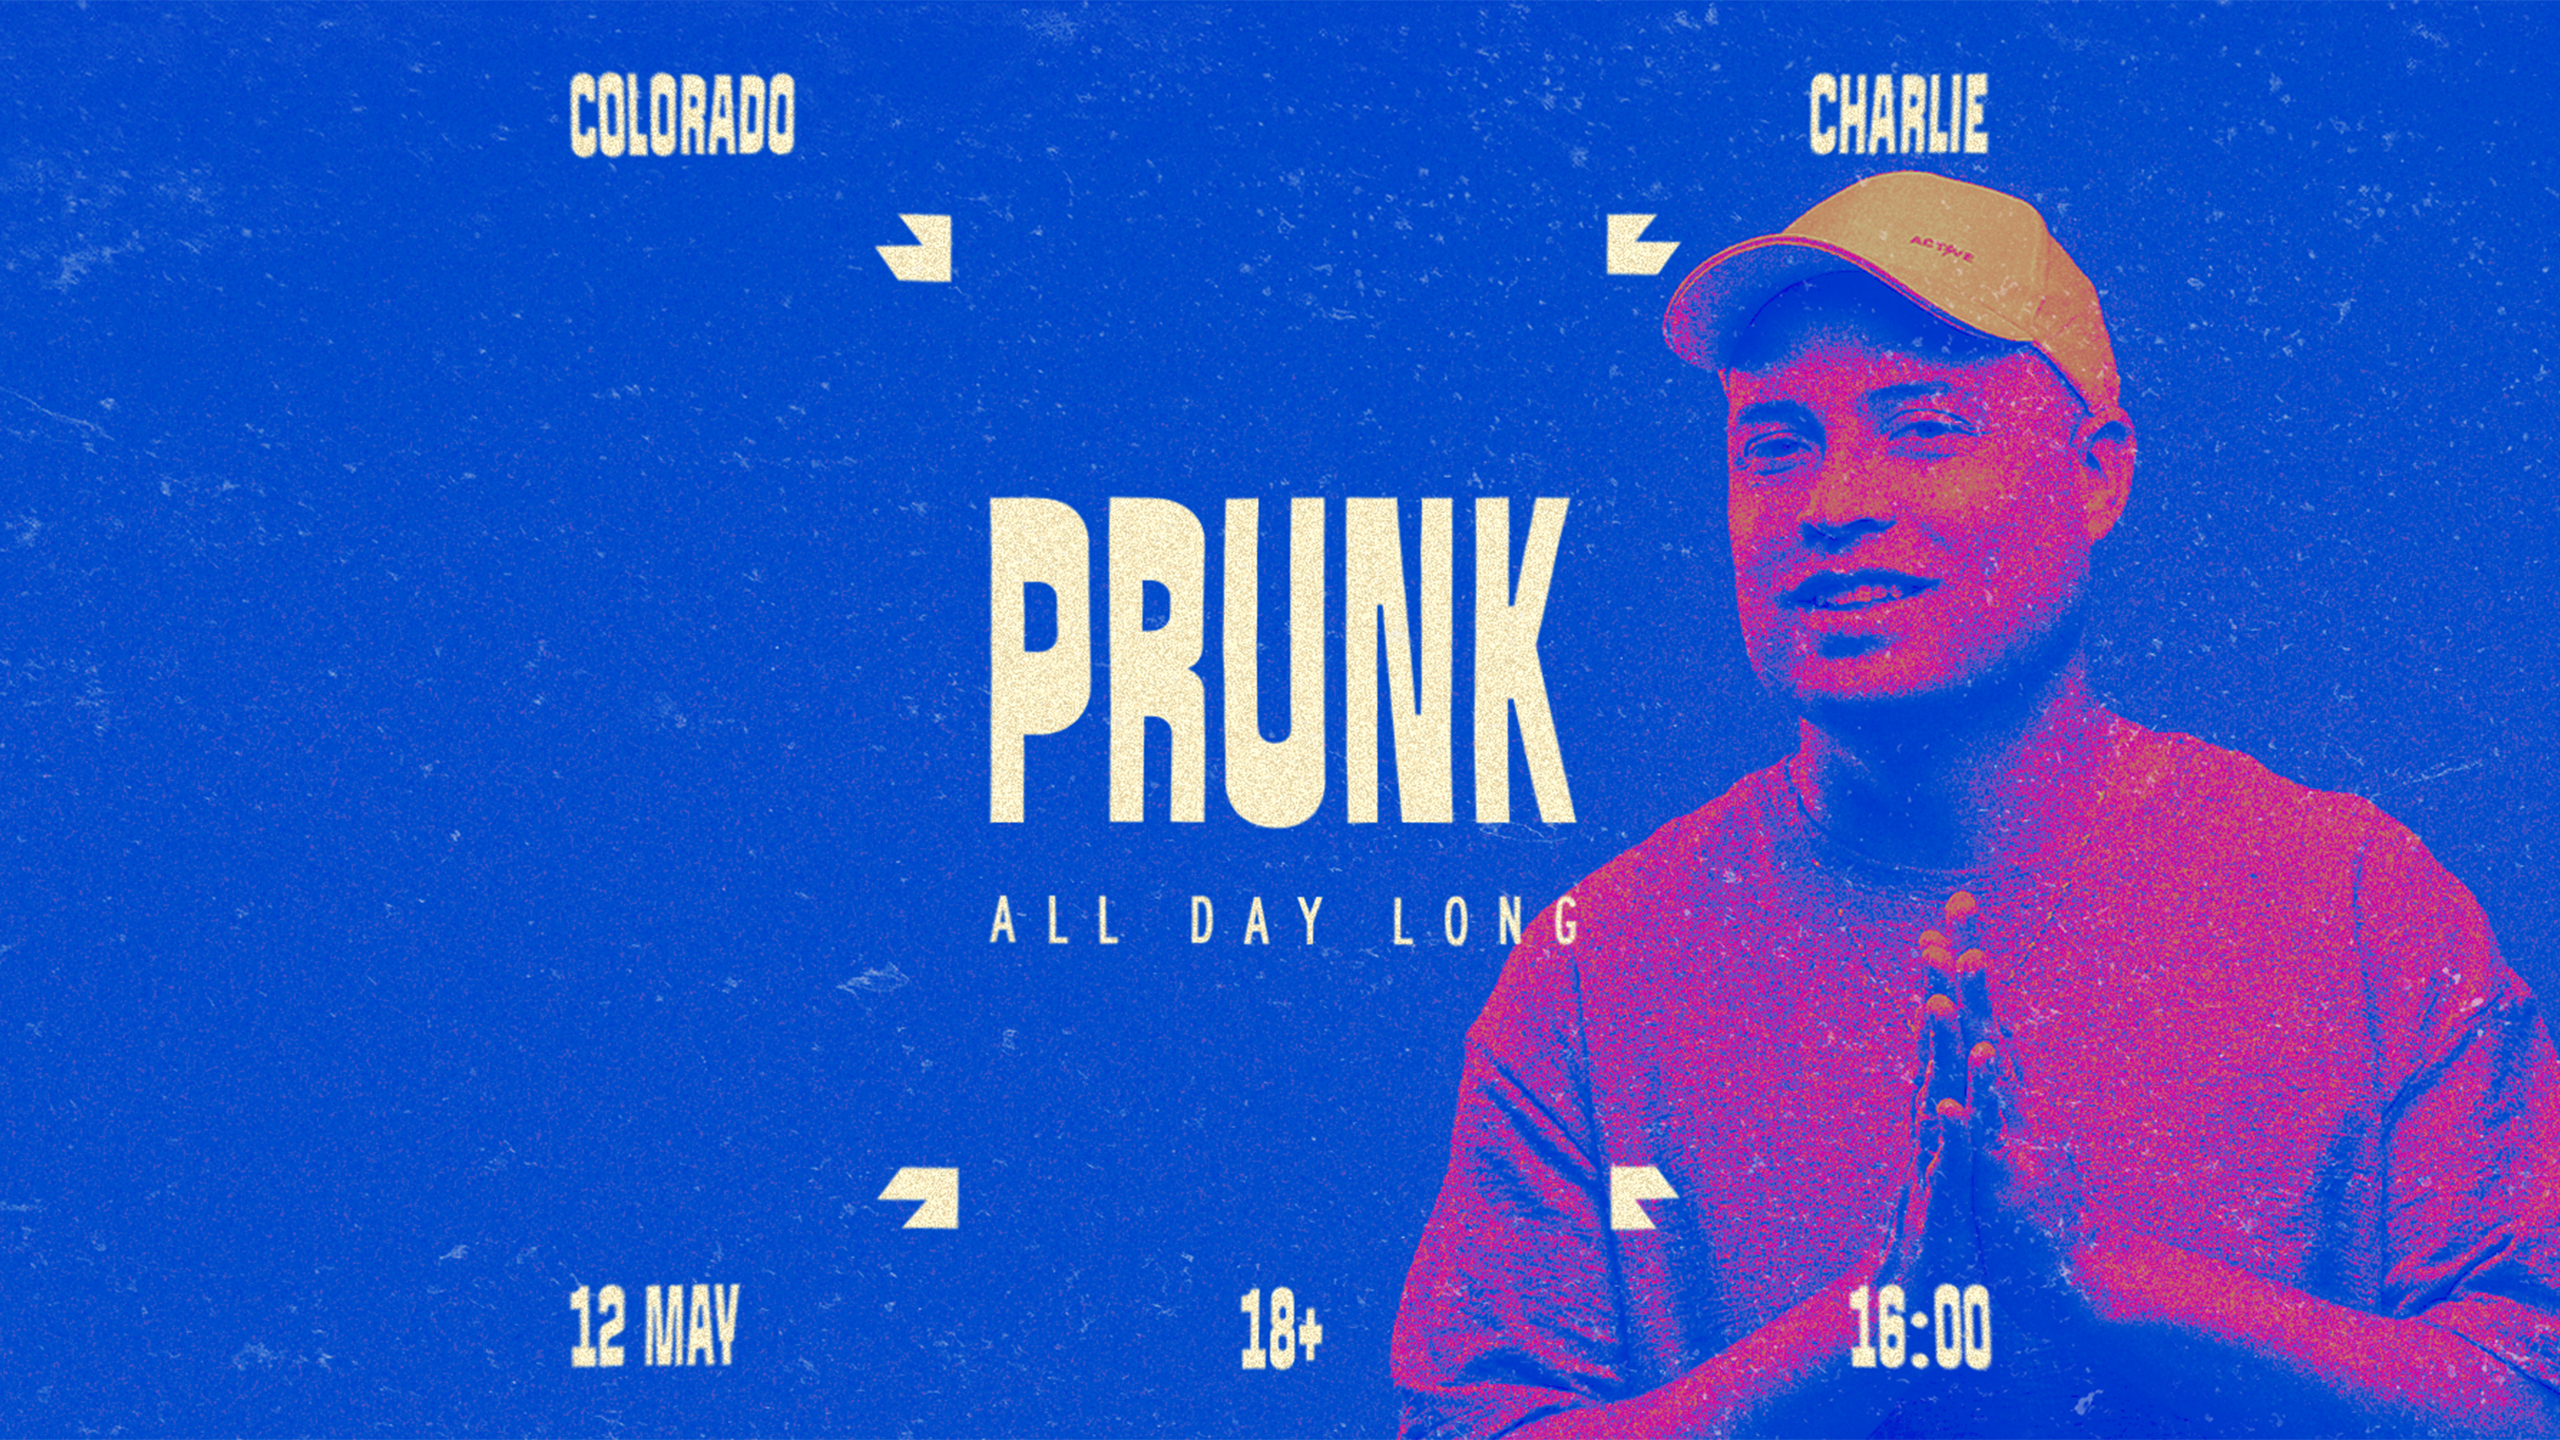 Colorado Charlie with Prunk (All Day Long) - Página frontal